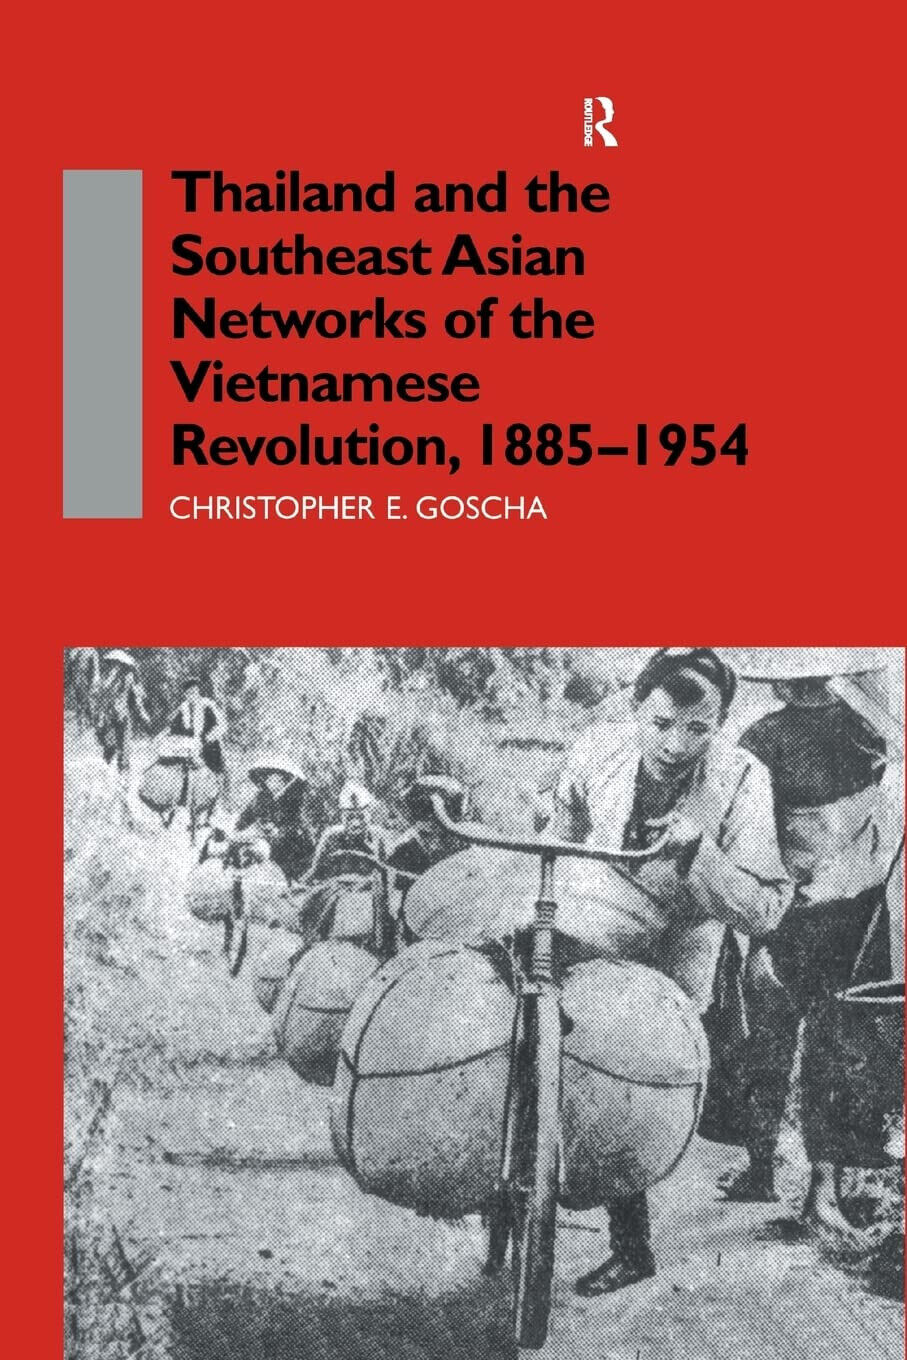 Thailand and the Southeast Asian Networks of The Vietnamese Revolution,1885-1954